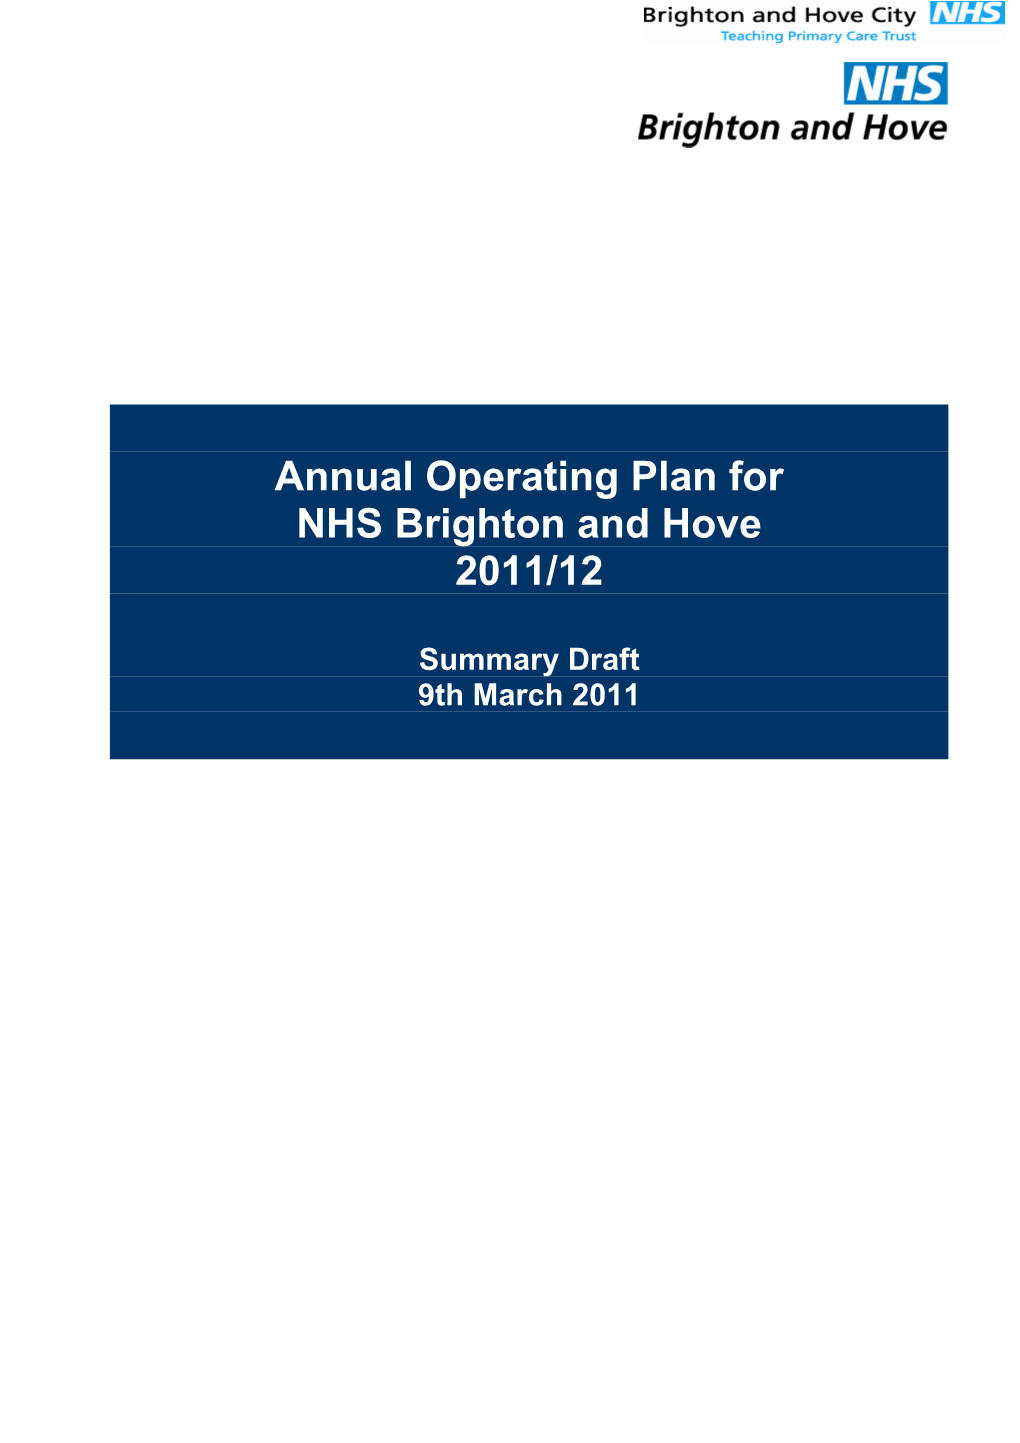 Annual Operating Plan For